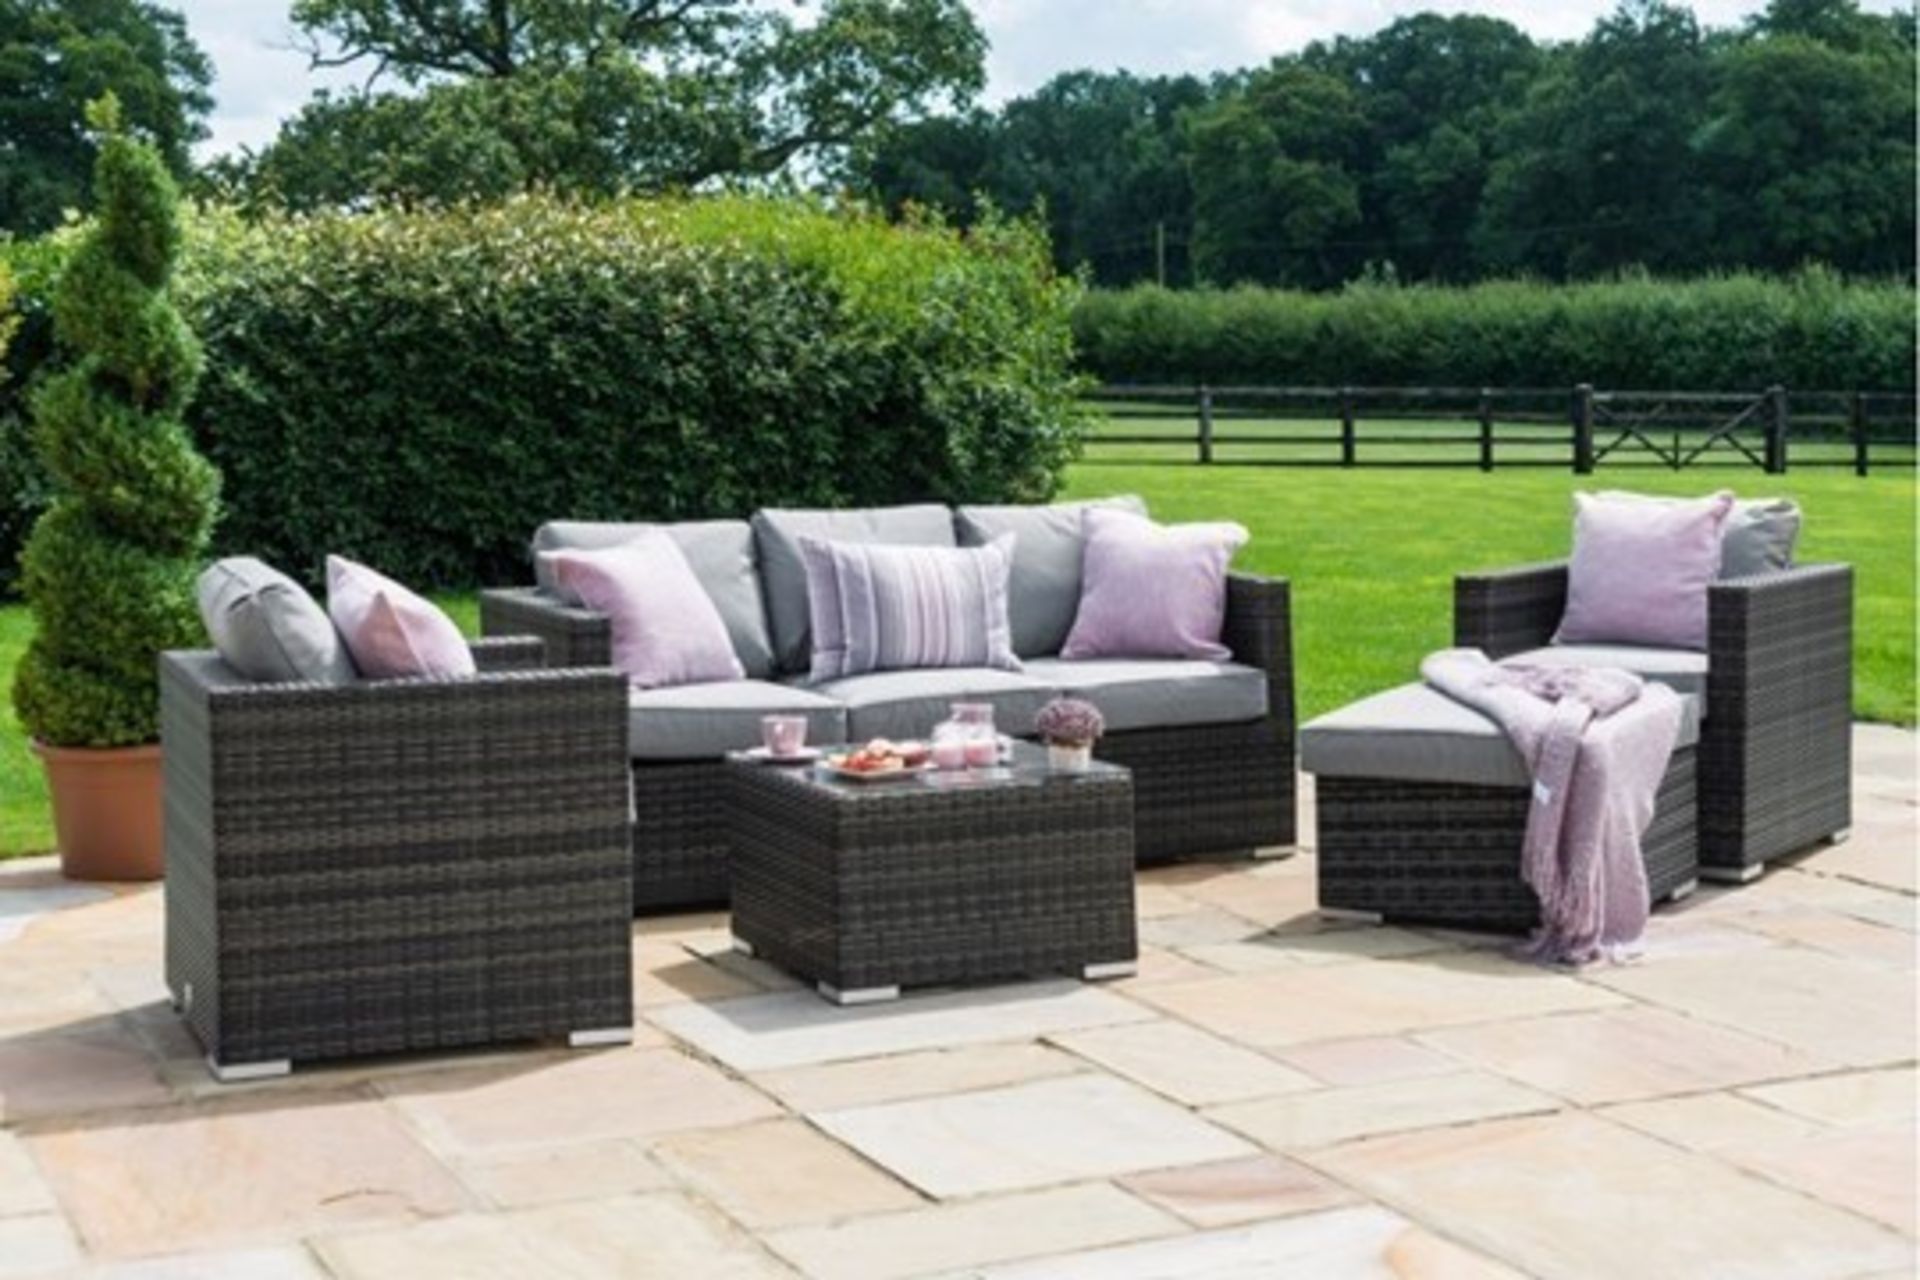 Rattan Georgia 3 Seat Outdoor Sofa Set With Ice Bucket Feature (Grey) *BRAND NEW* - Image 2 of 3